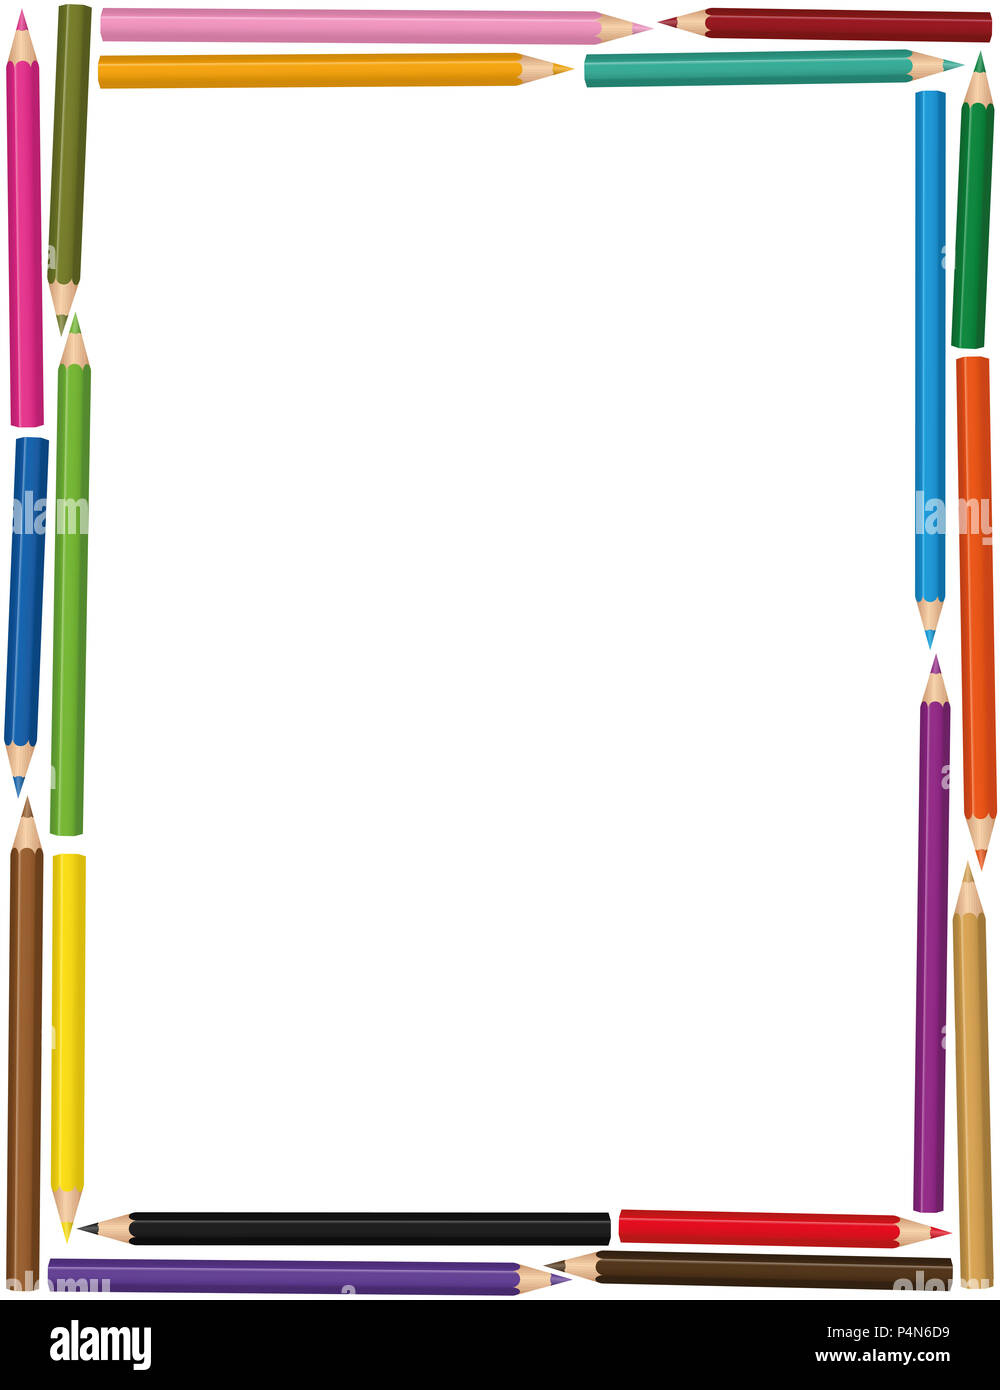 Colorful vertical crayons frame with loosely arranged color pencil set -  illustration on white background. Stock Photo